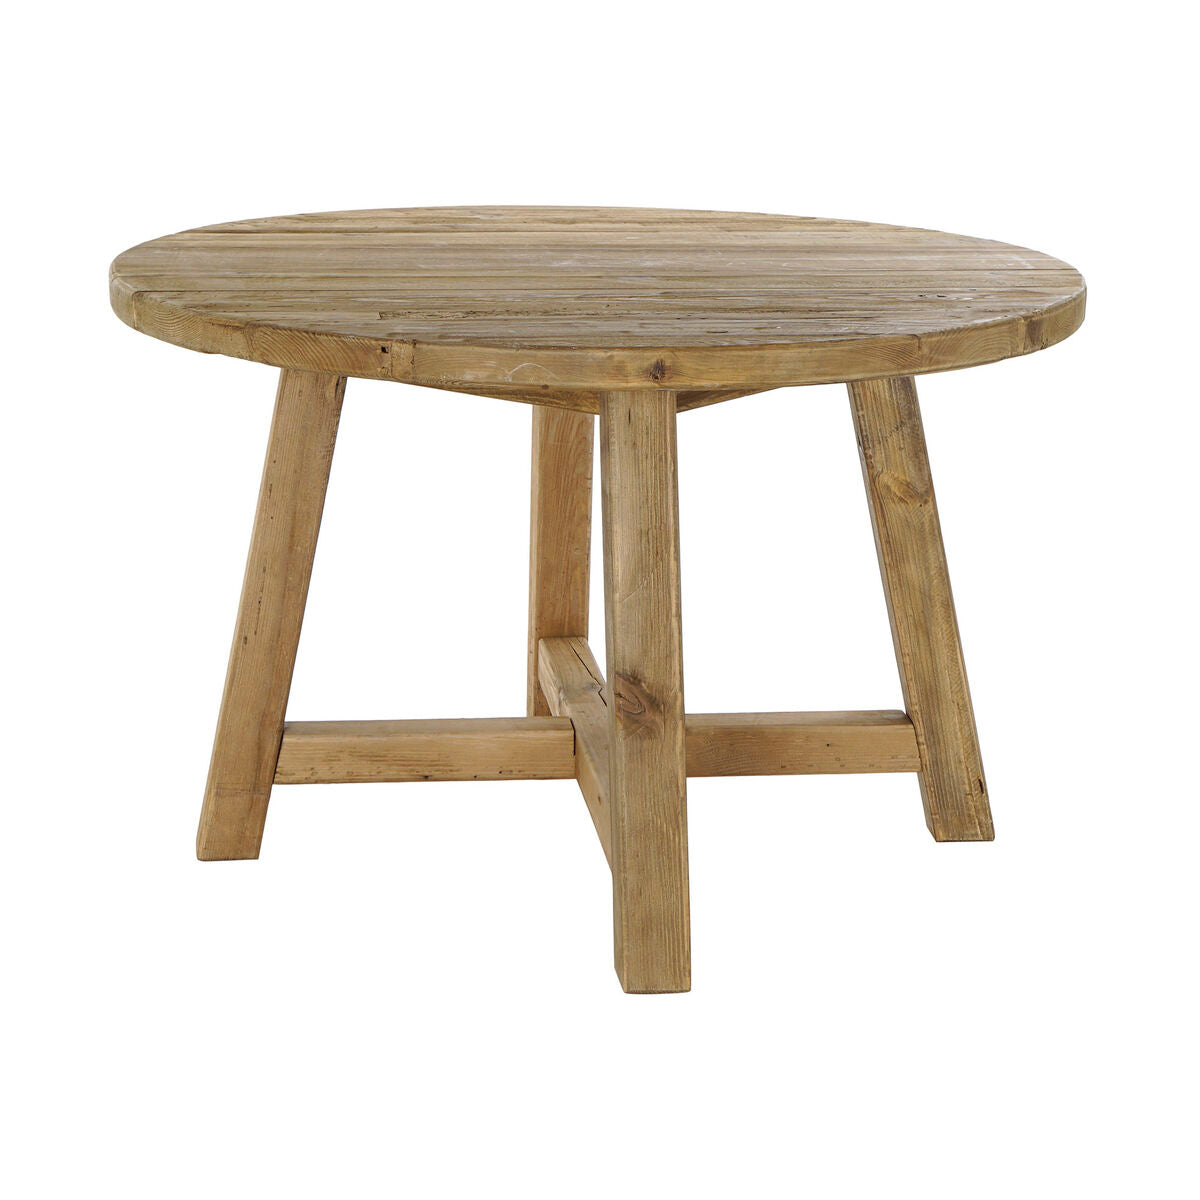 Dining Table DKD Home Decor Natural Pinewood 120 x 120 x 76 cm